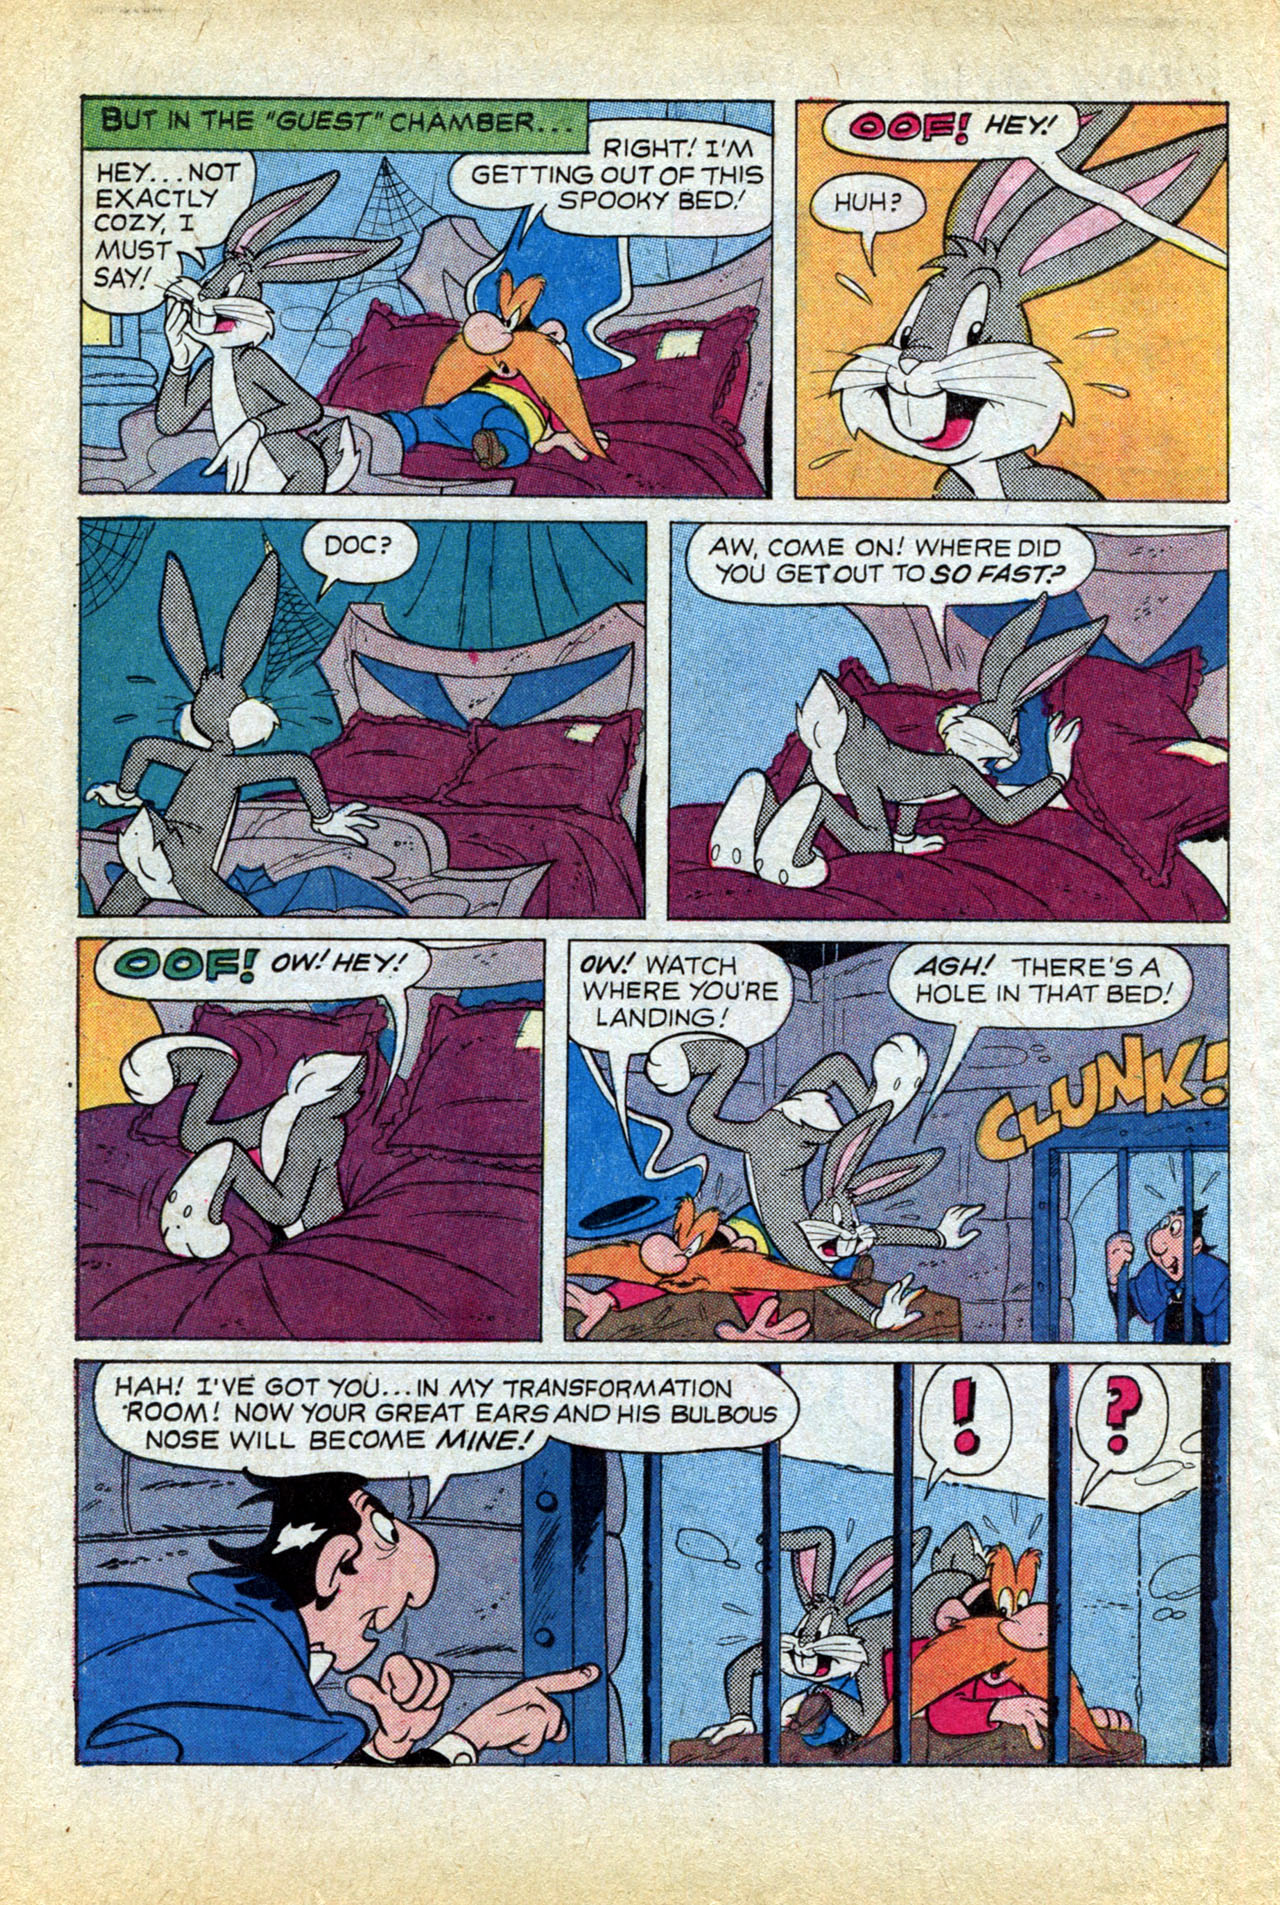 Read online Yosemite Sam and Bugs Bunny comic -  Issue #7 - 22